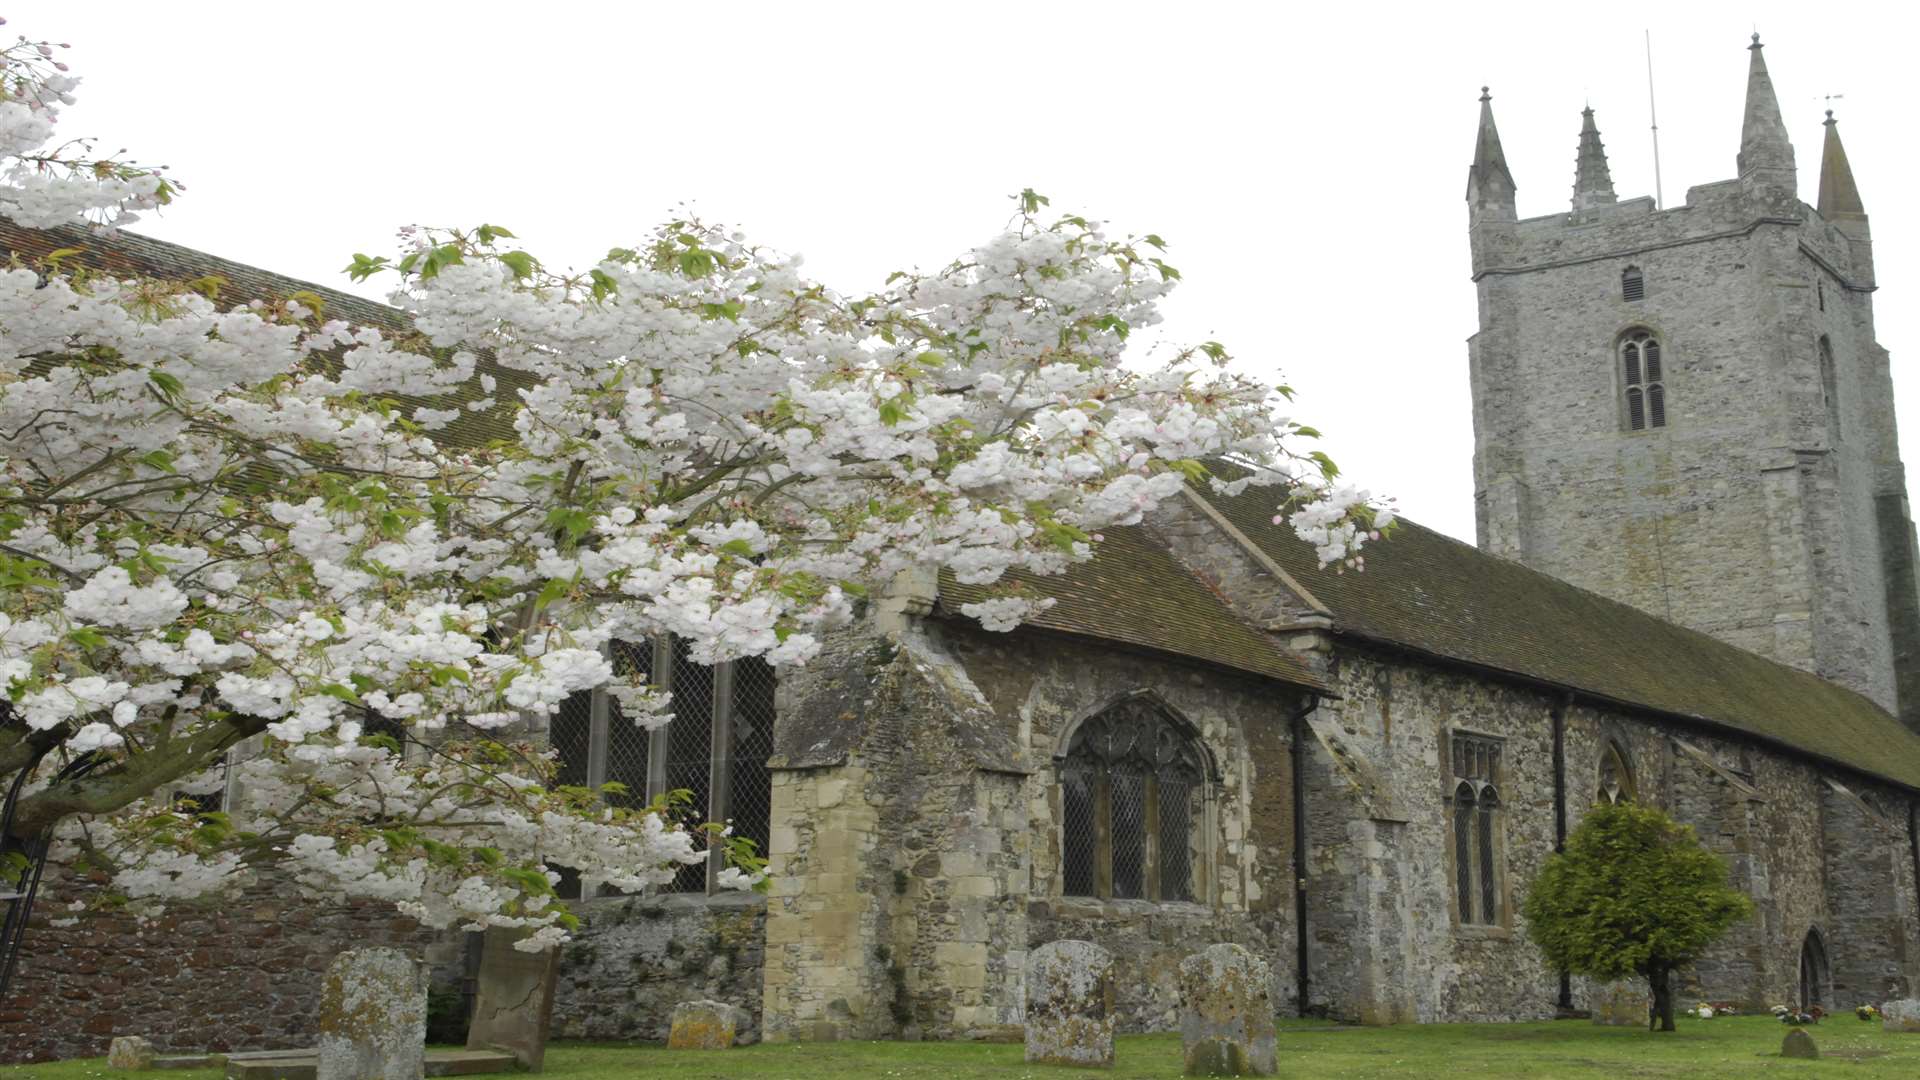 The funeral was held at All Saints' Church in Lydd